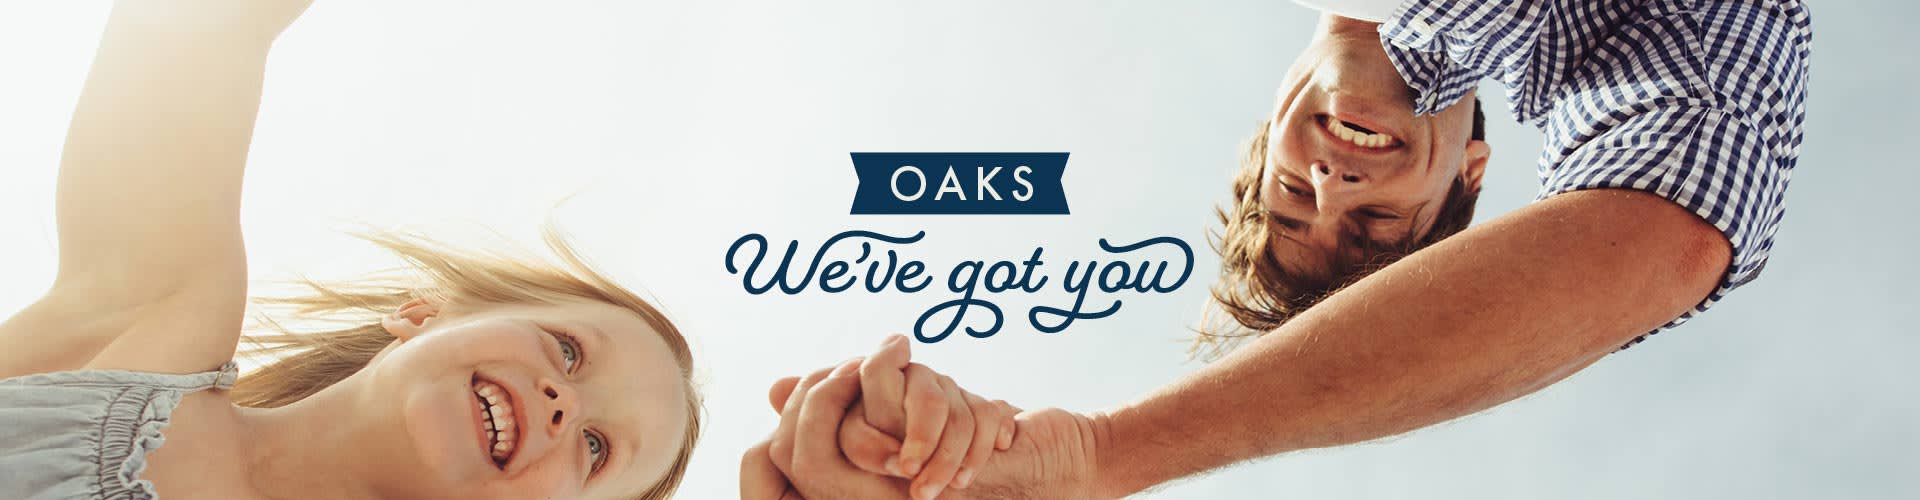 Plan and book ahead, secure that much needed holiday with Oaks Hotels, Resorts and Suite flexible cancellation.